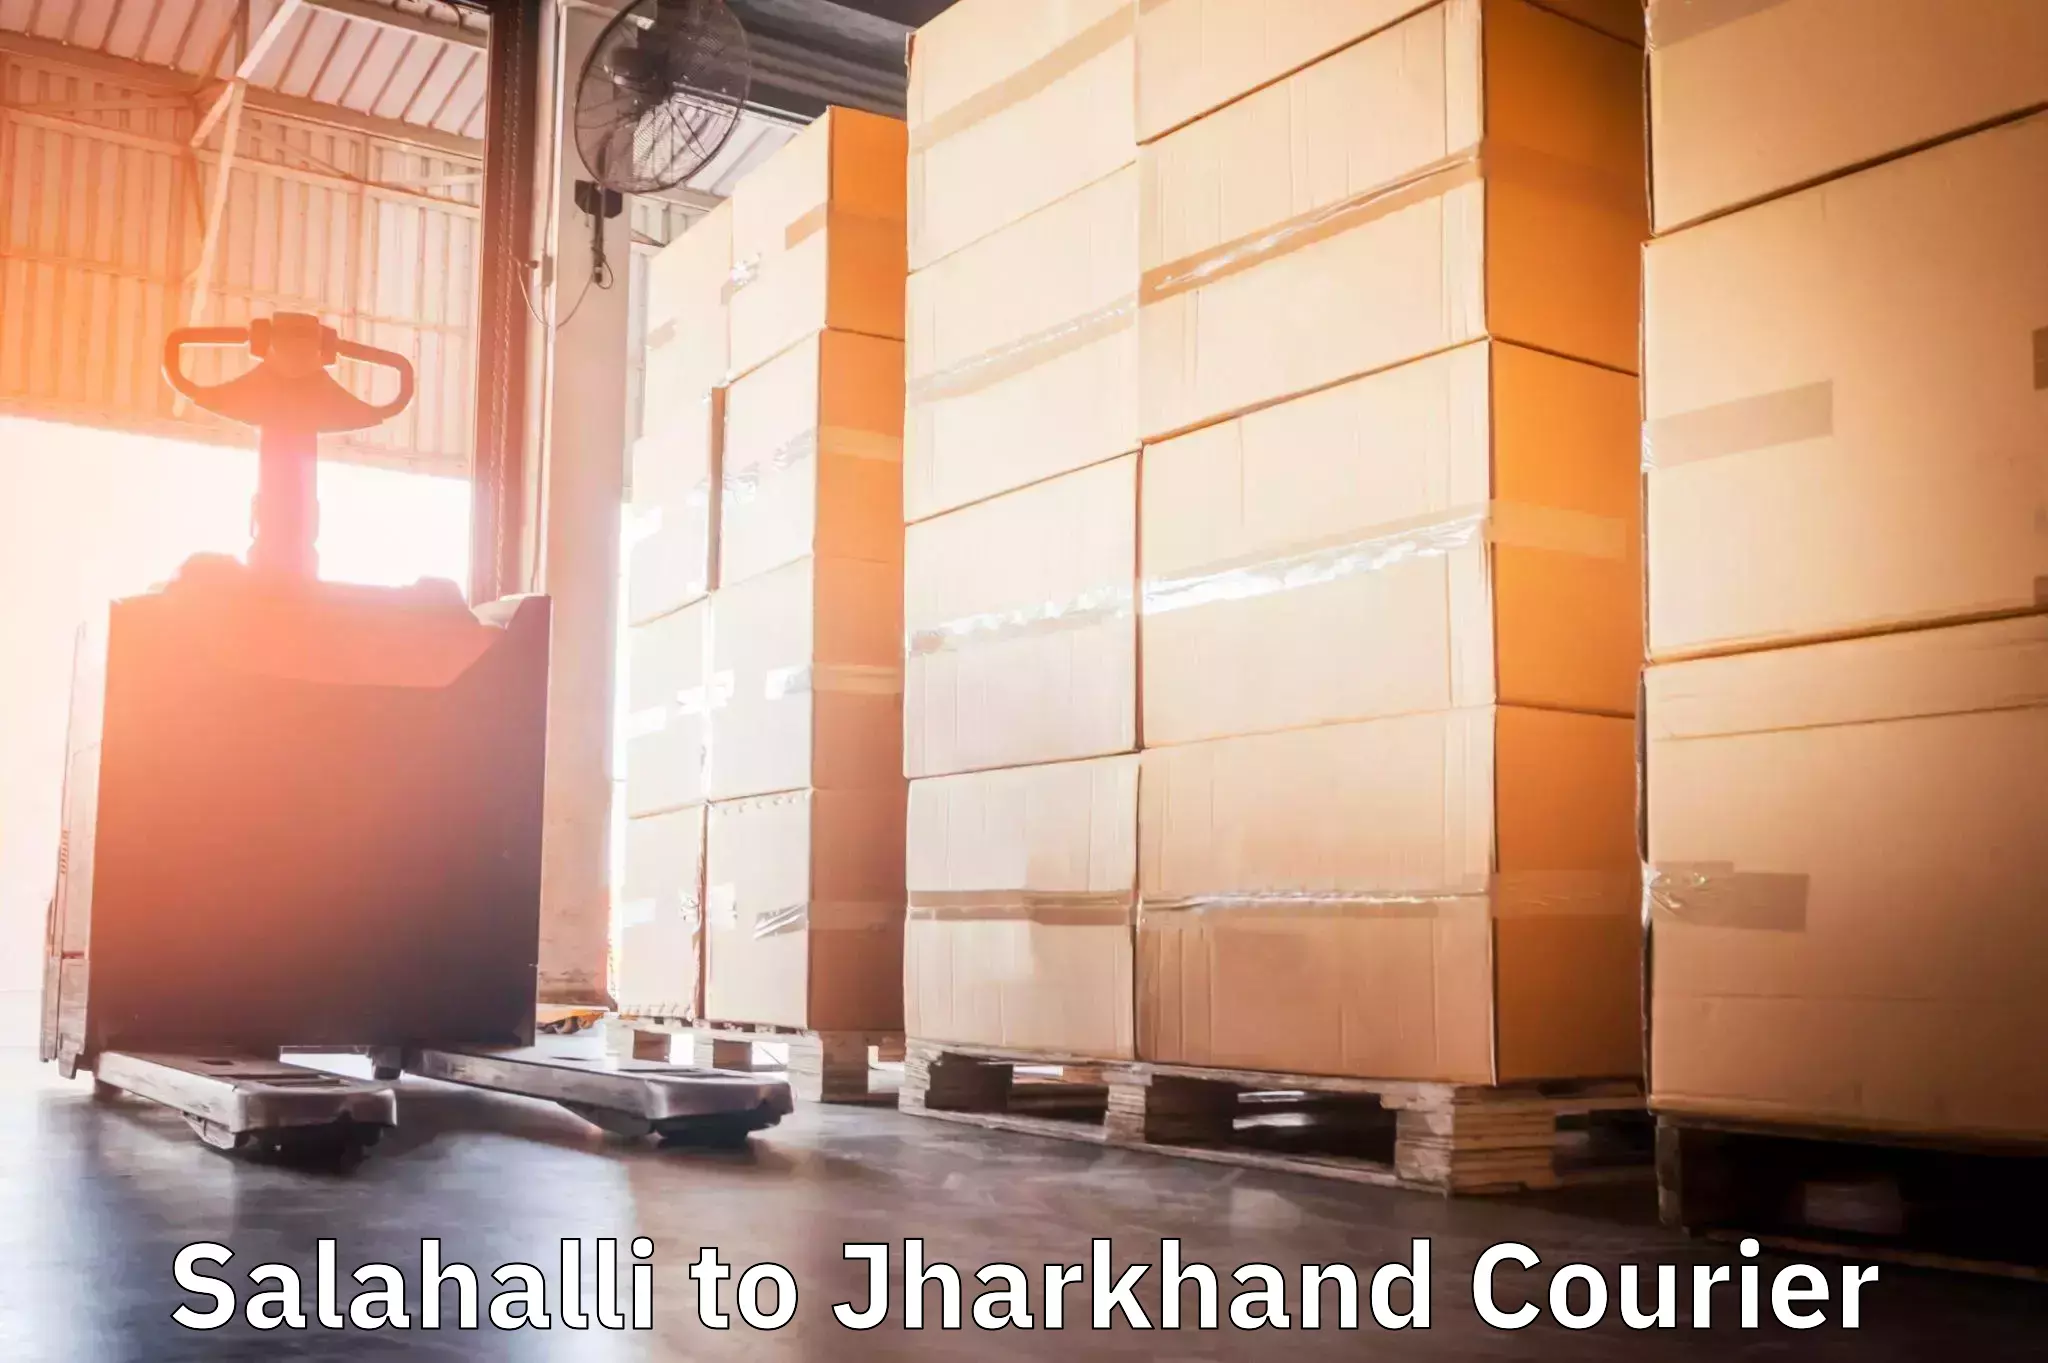 High-quality delivery services in Salahalli to Shikaripara